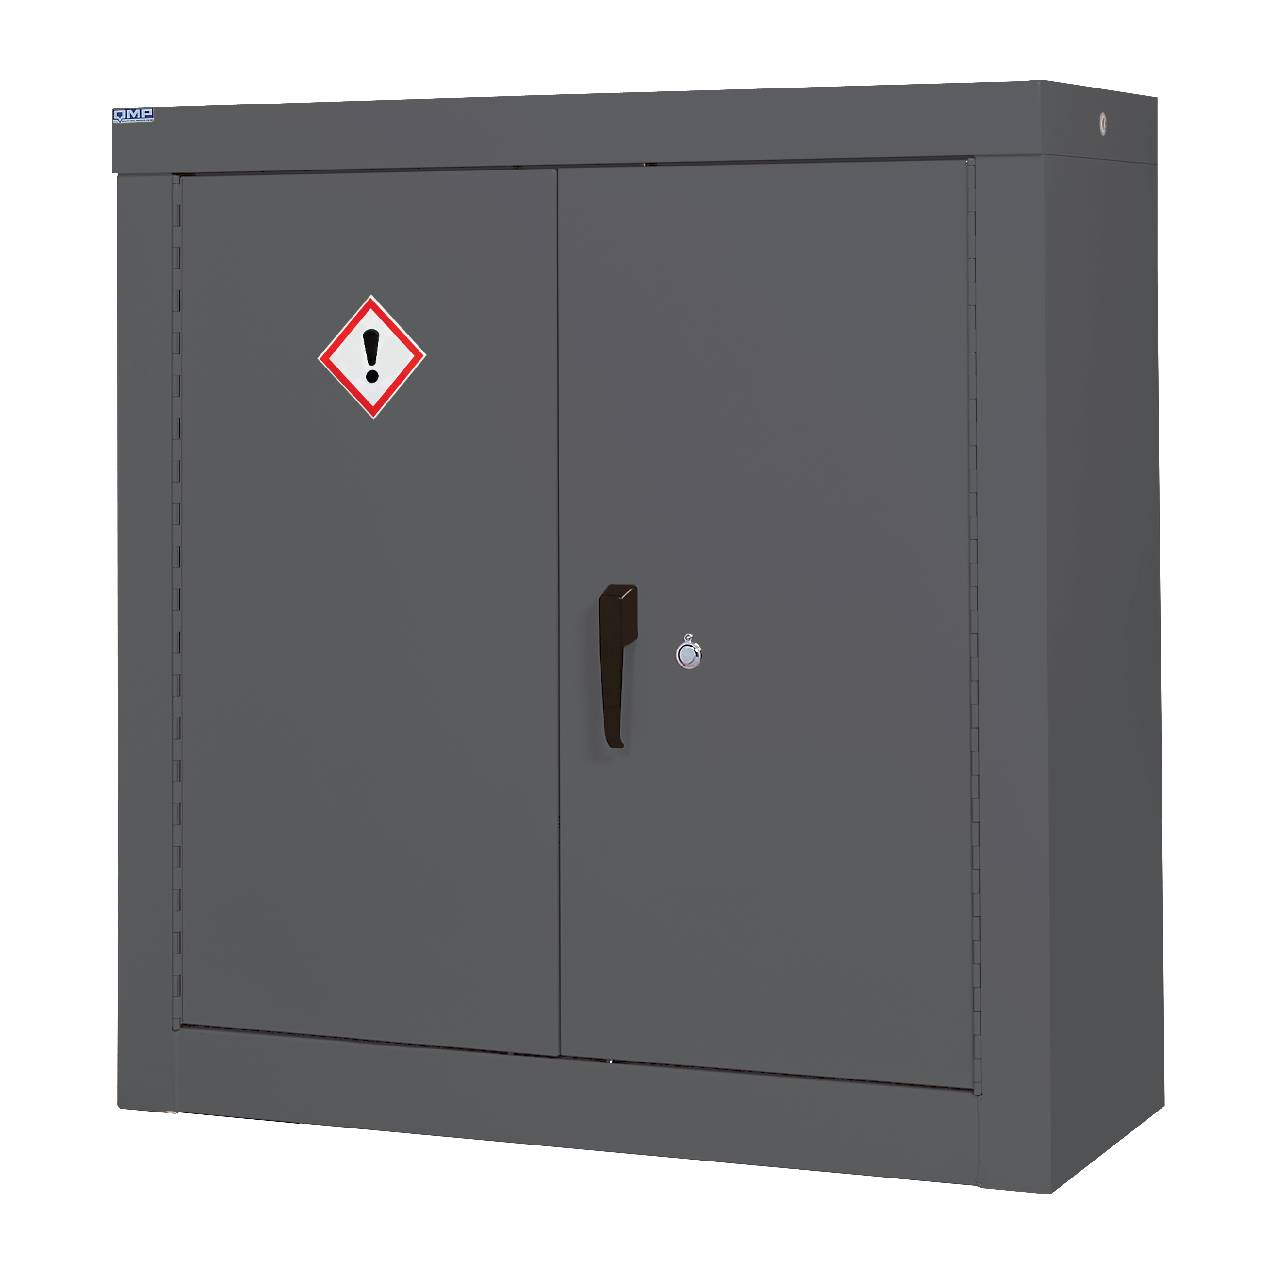 QMP COSHH Floor Standing Security Cabinets - 1200H x 1200W x 460D mm